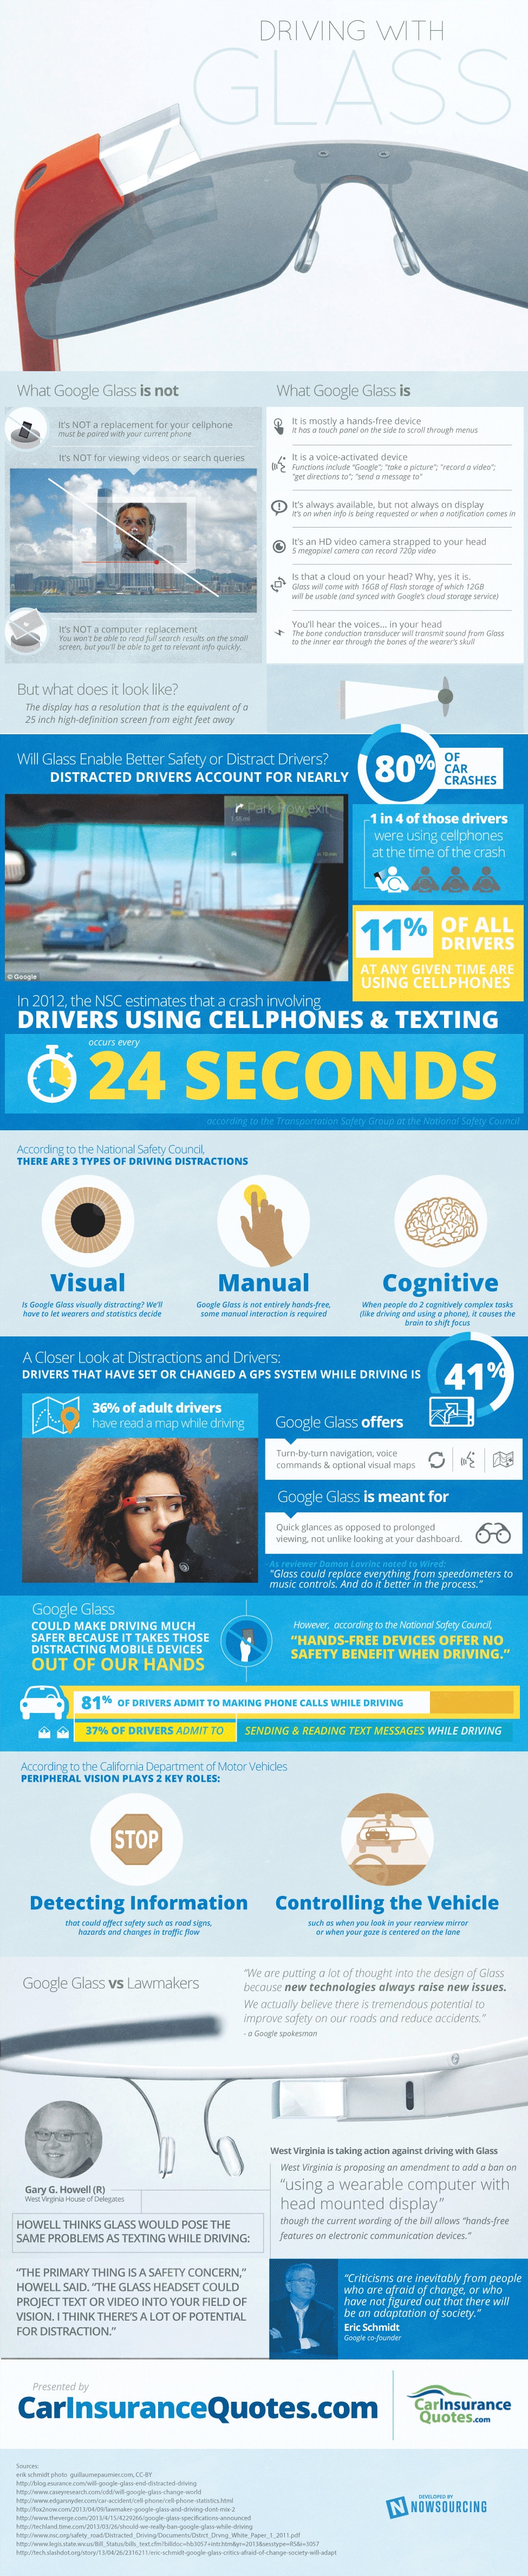 google-glass-driving-experience-infographic